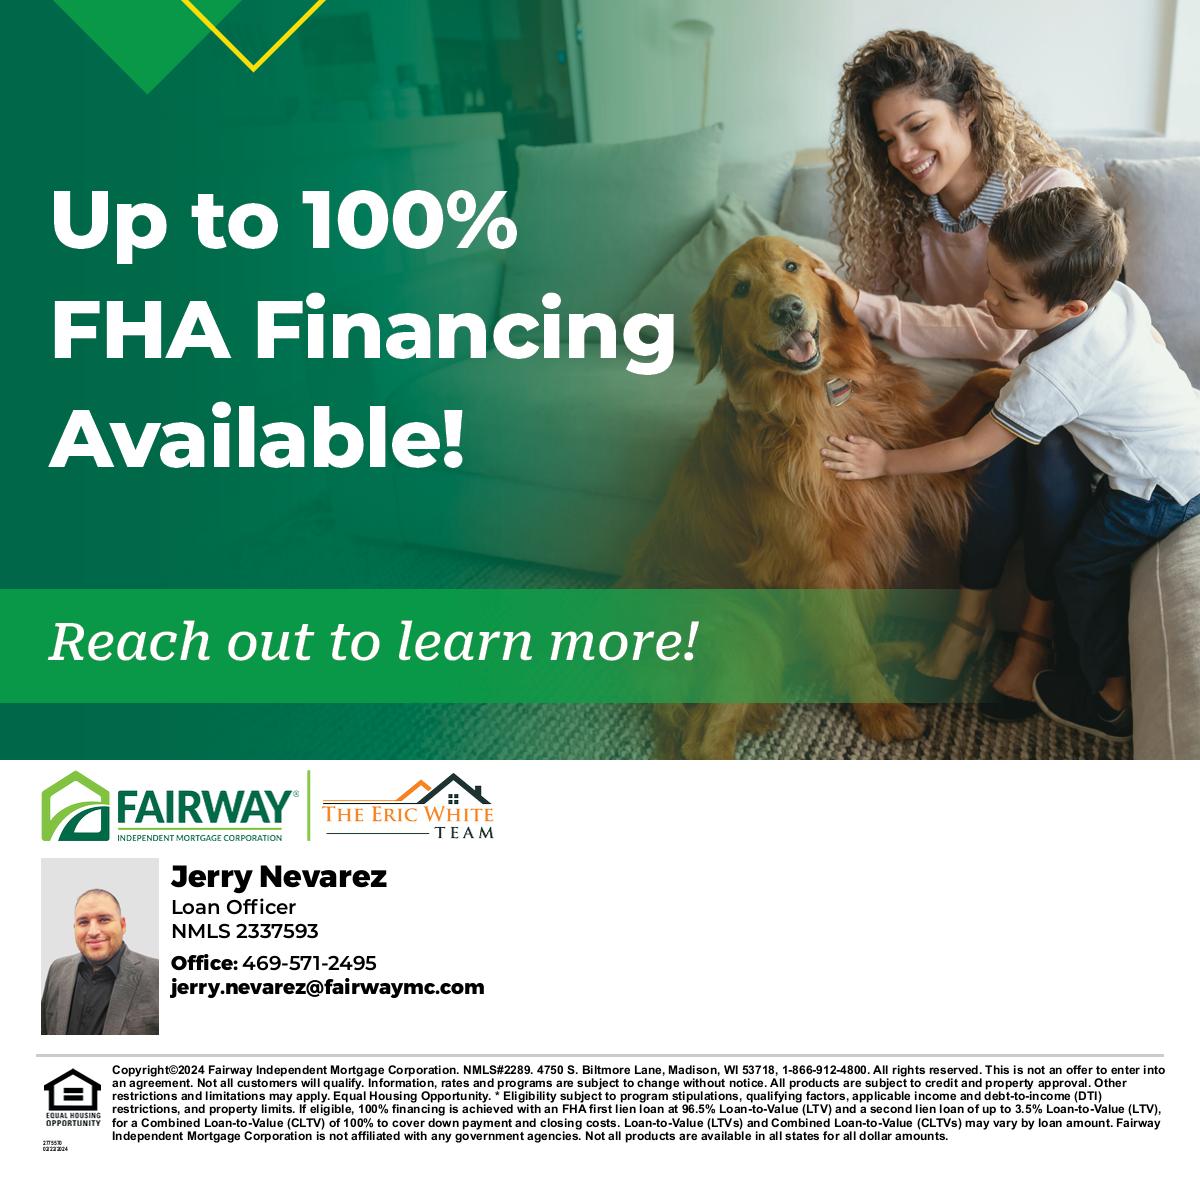 Want to learn more? Contact me today! #jerry_themortgageguy #dfwrealestate #financegoals #homebuyertips #interestrates #ownyourhome #realestatefinance #PreApprovalMagic #DreamHomeAwaits #MortgageMatters #YourLoanExpert